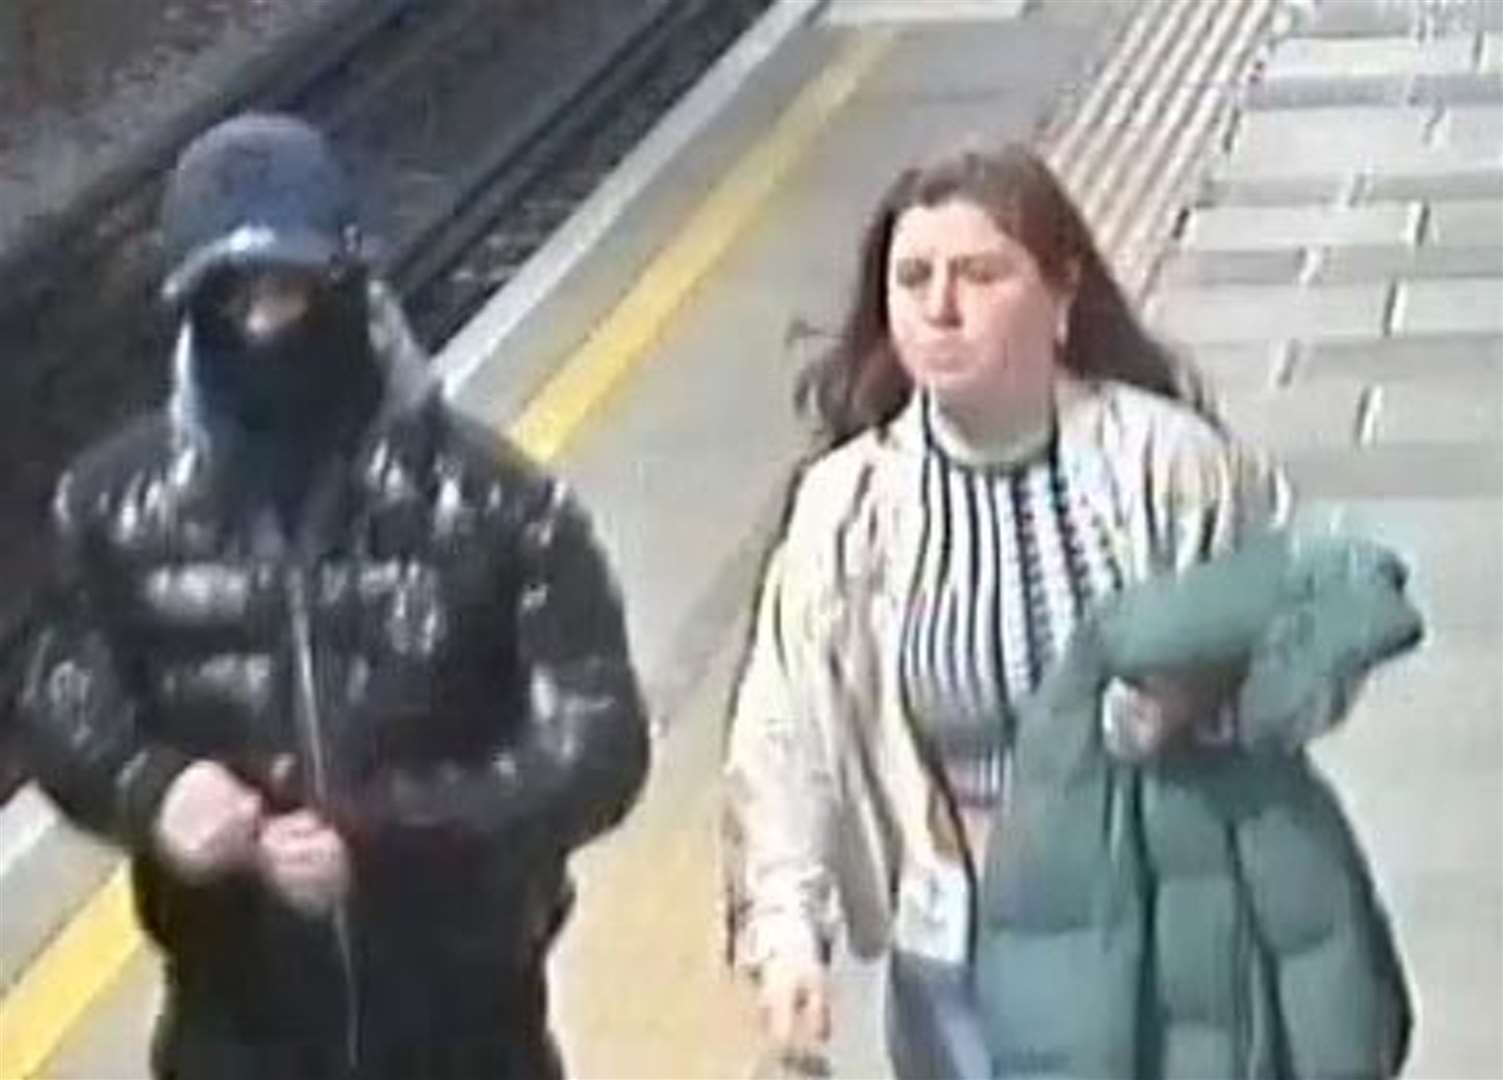 Two people officers would like to speak to in connection with the incident (British Transport Police/PA)